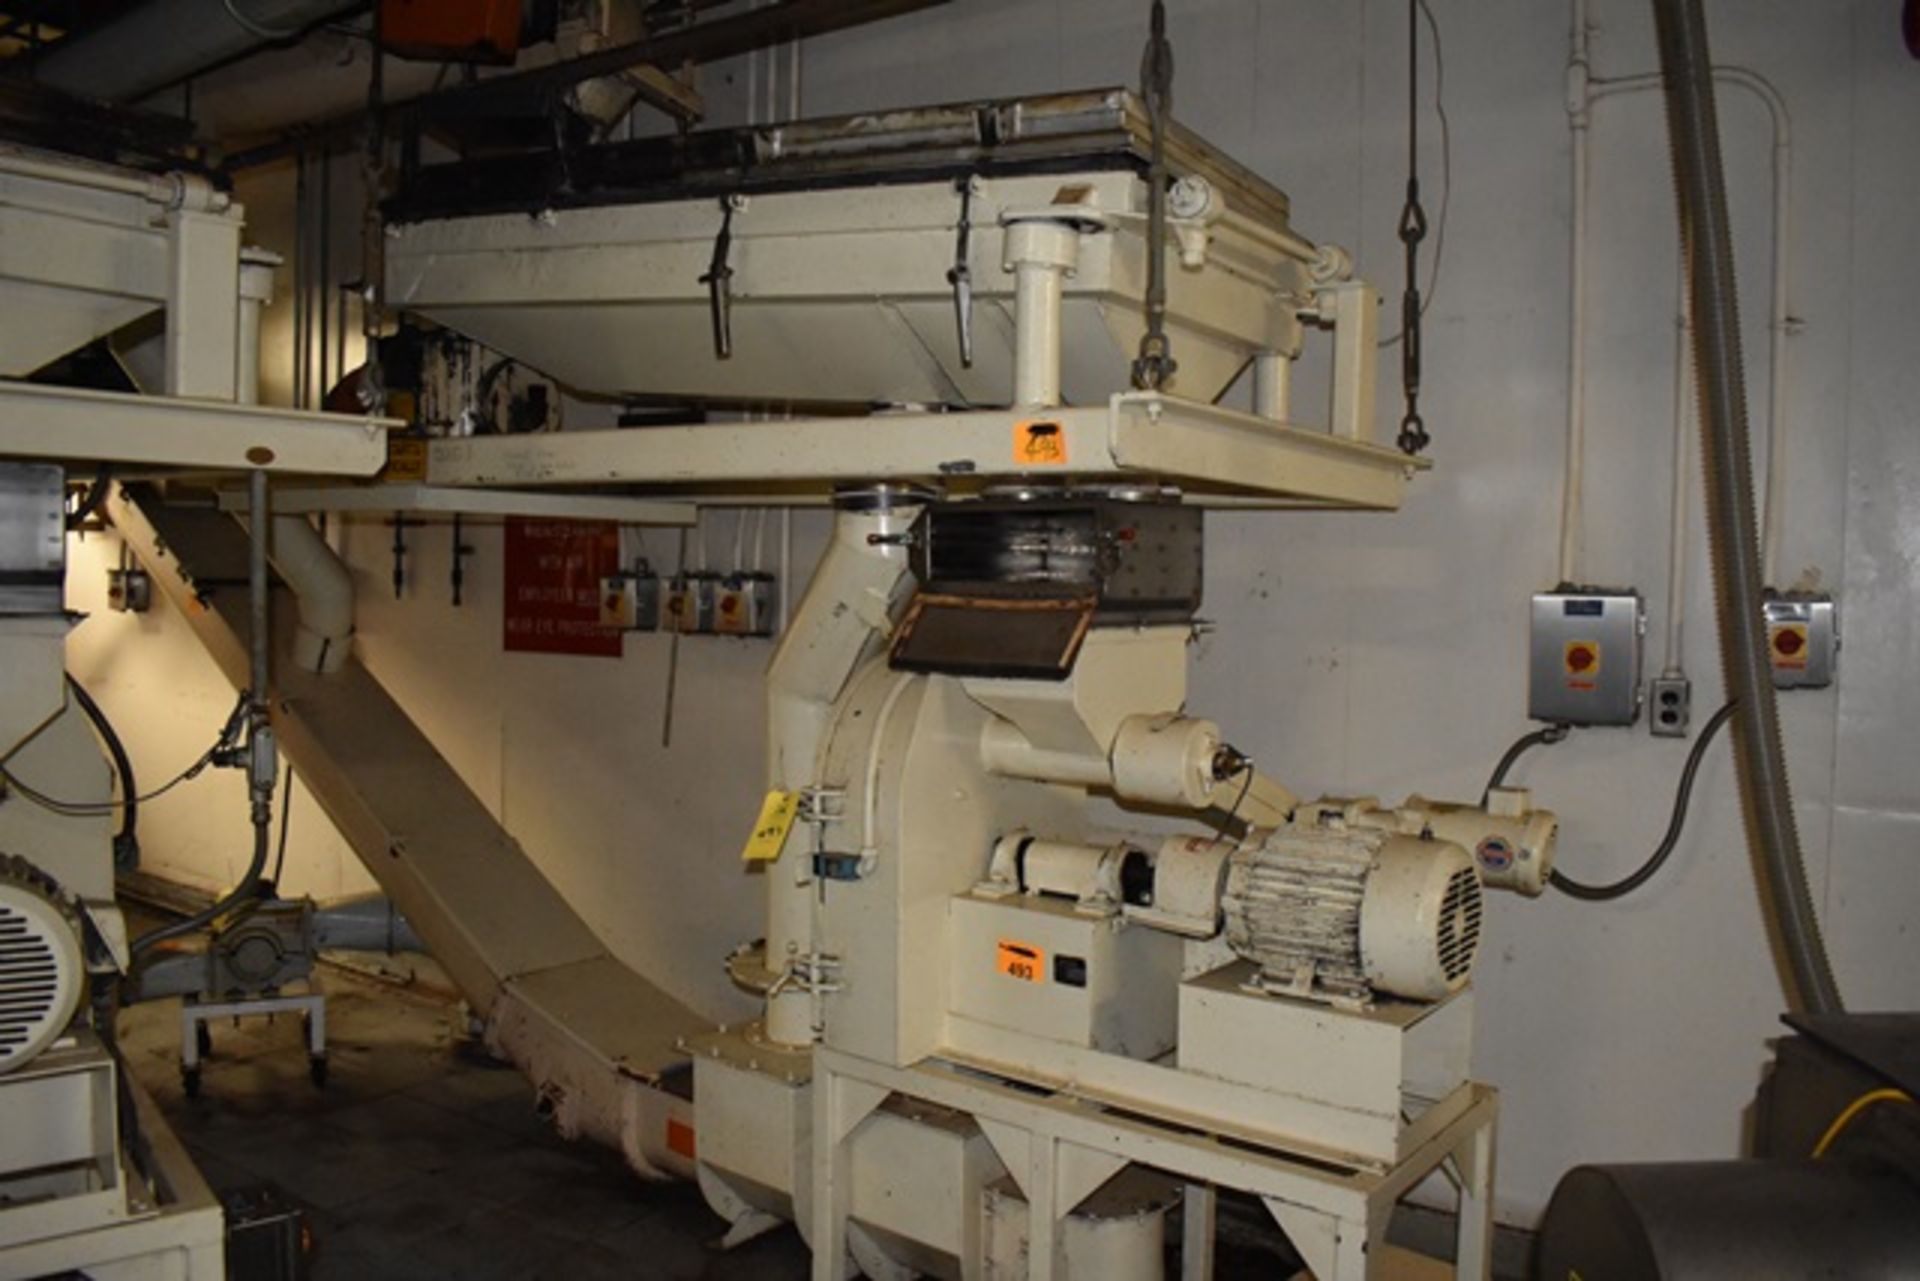 Jacobson hammermill, model P-160-DFF, s/n 36876, with 4" dia screw feeder, 10hp drive @ 9:95 ration,